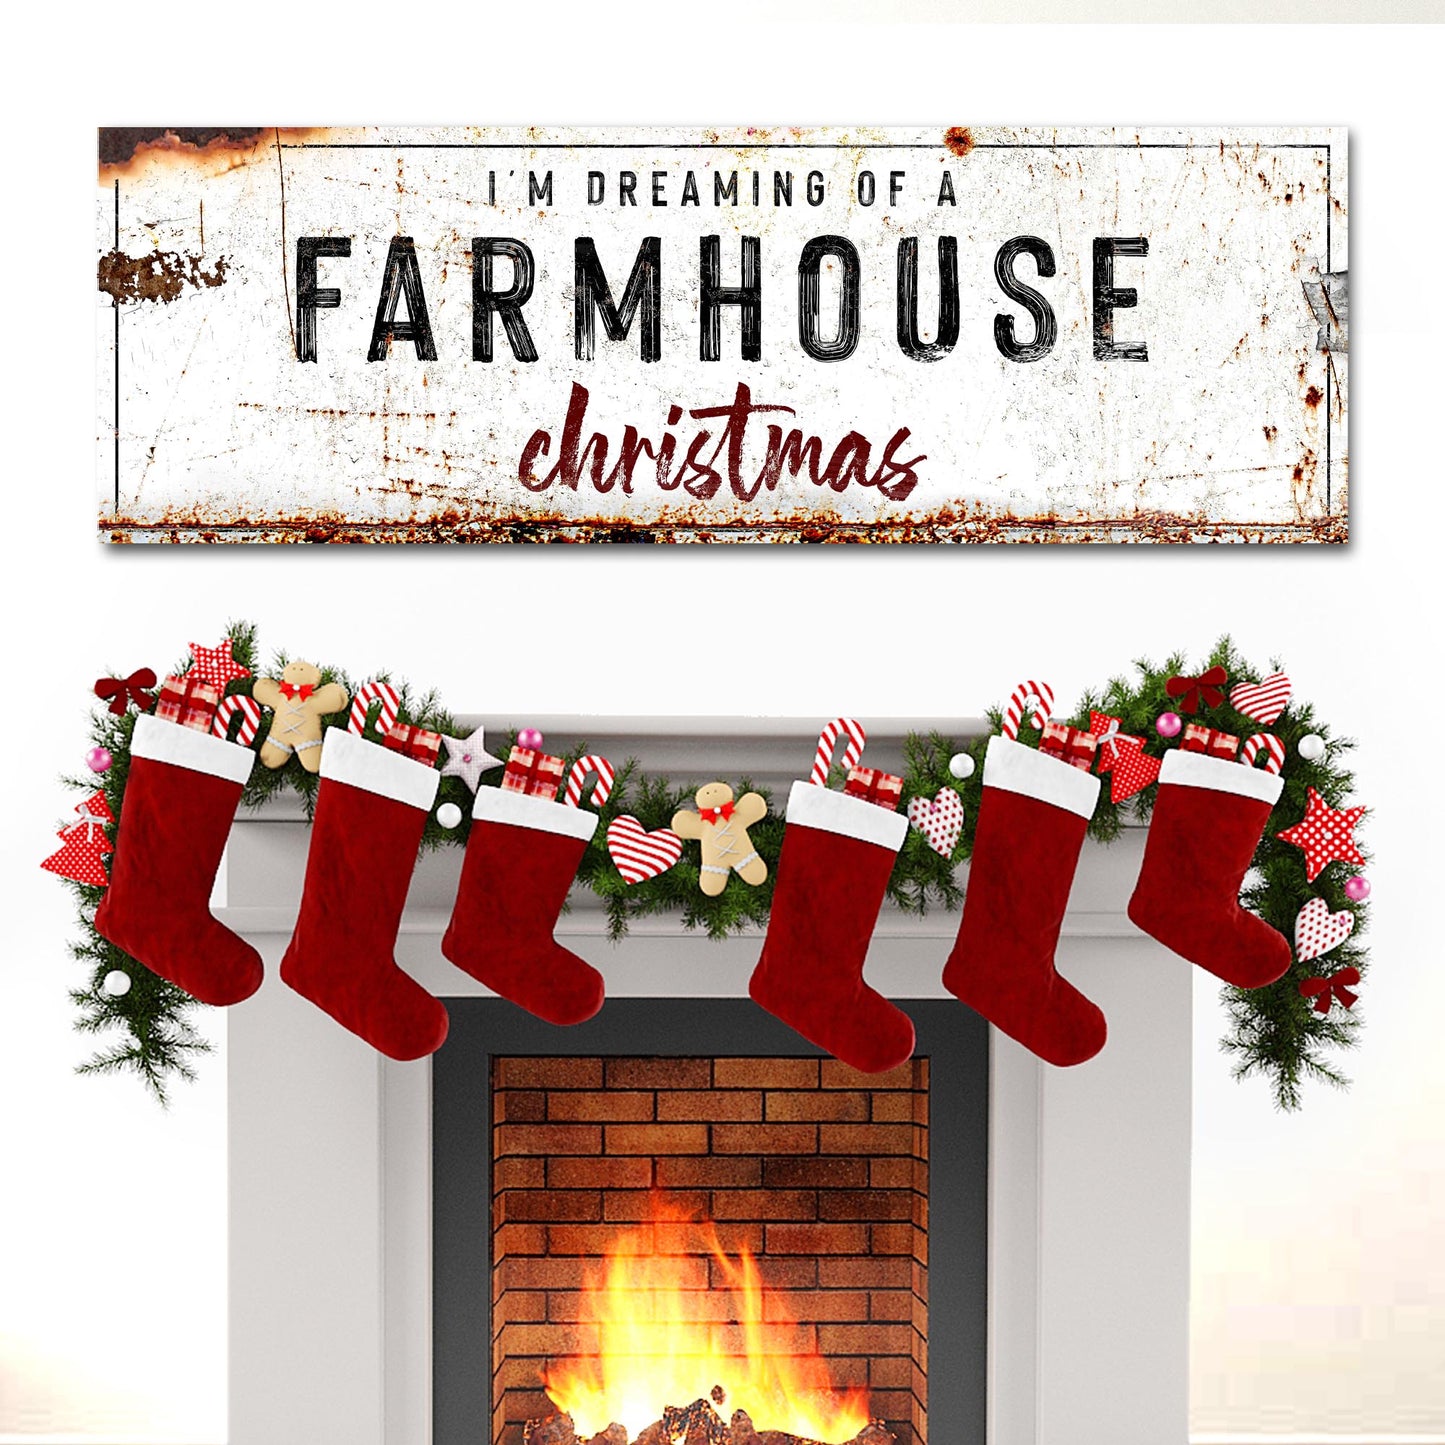 Dreaming Of A Farmhouse Christmas Sign - Image by Tailored Canvases